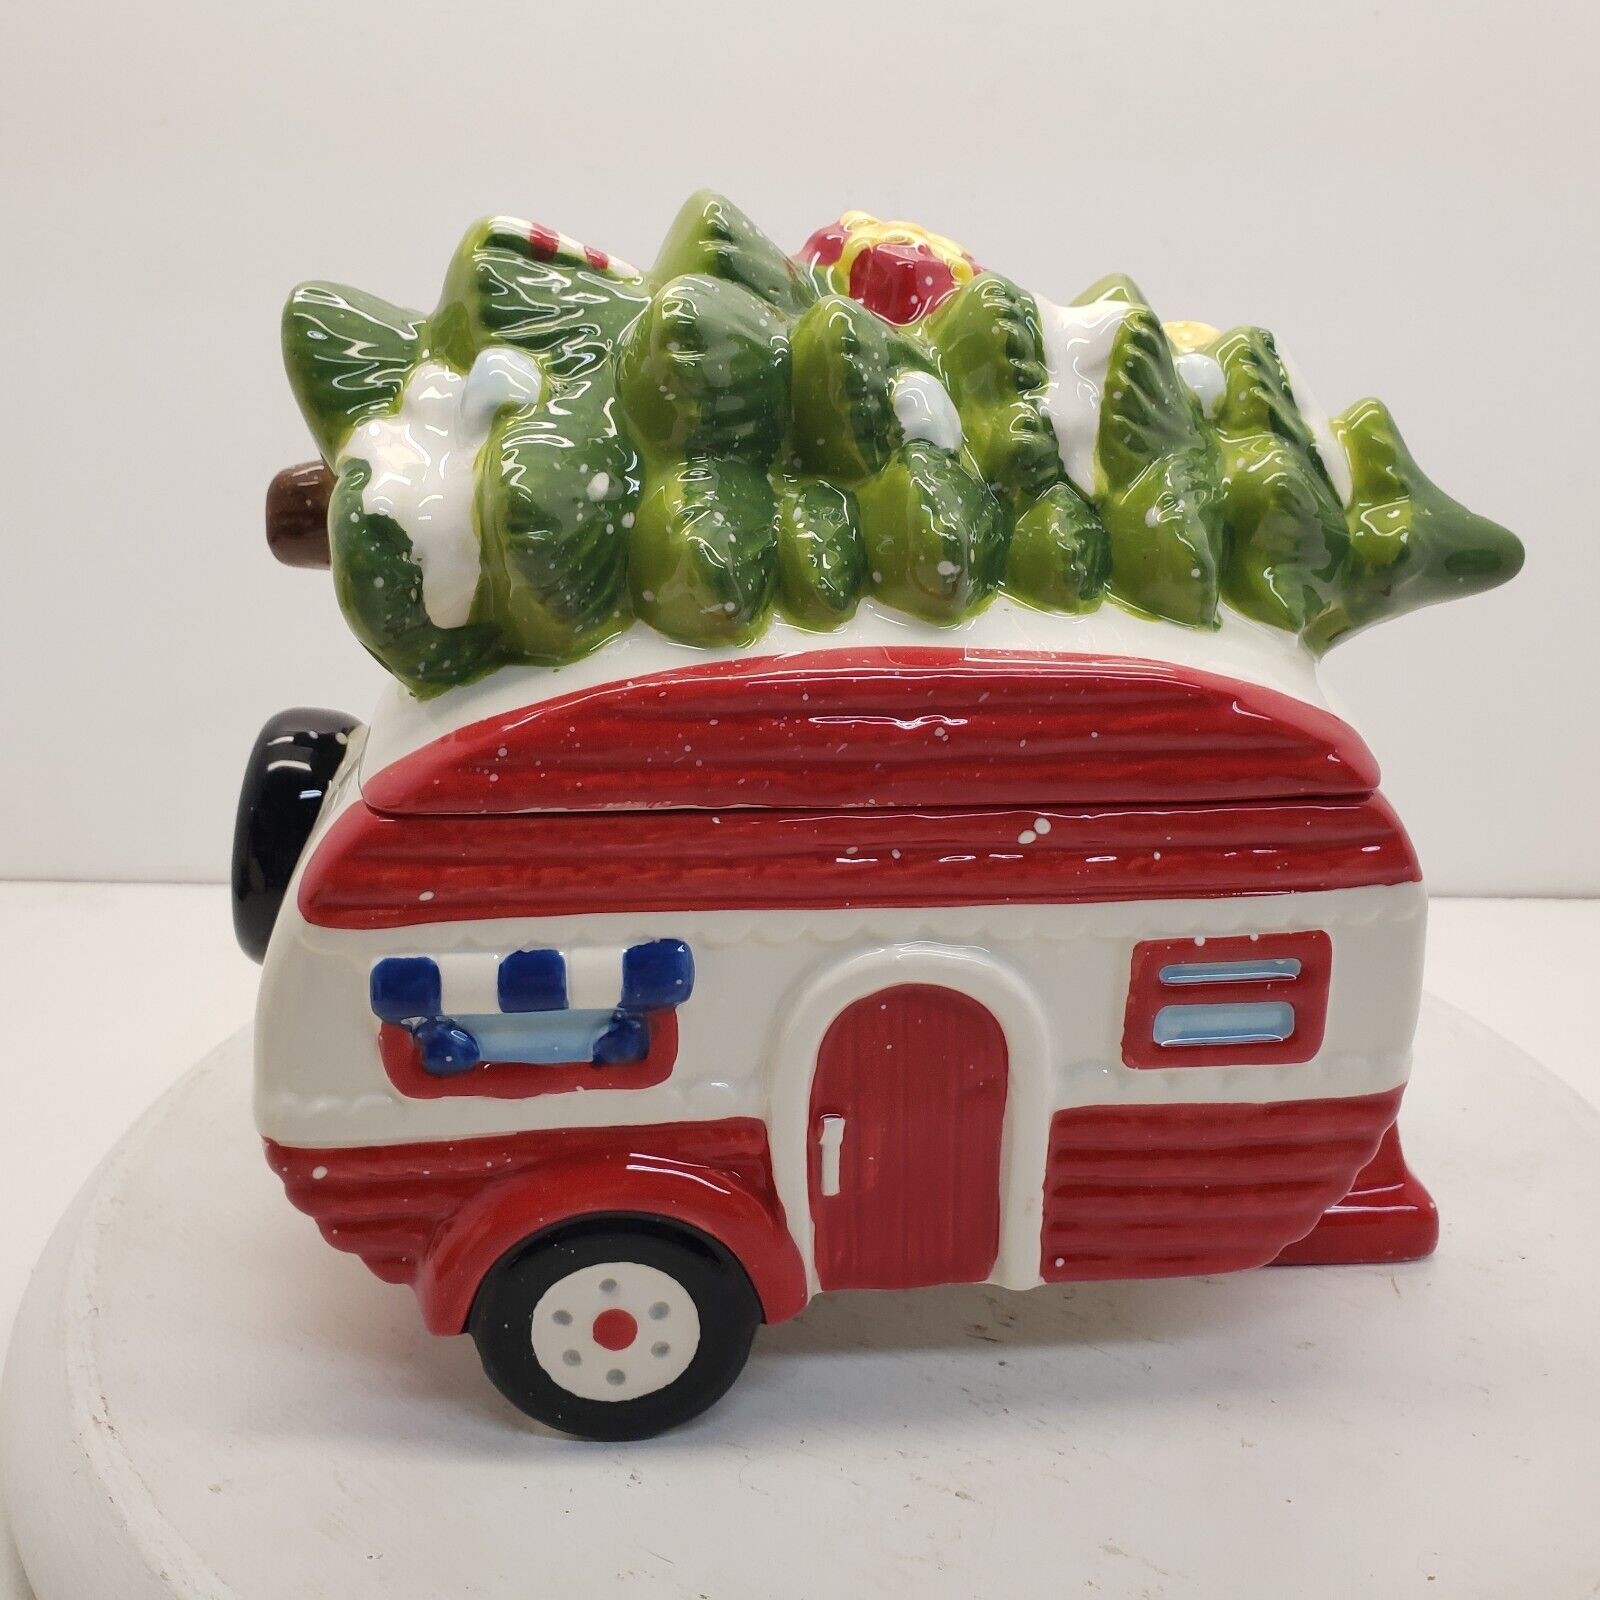 Arlington Designs Christmas Camper Cookie Jar With Tree On Roof. RV, Tiny Home